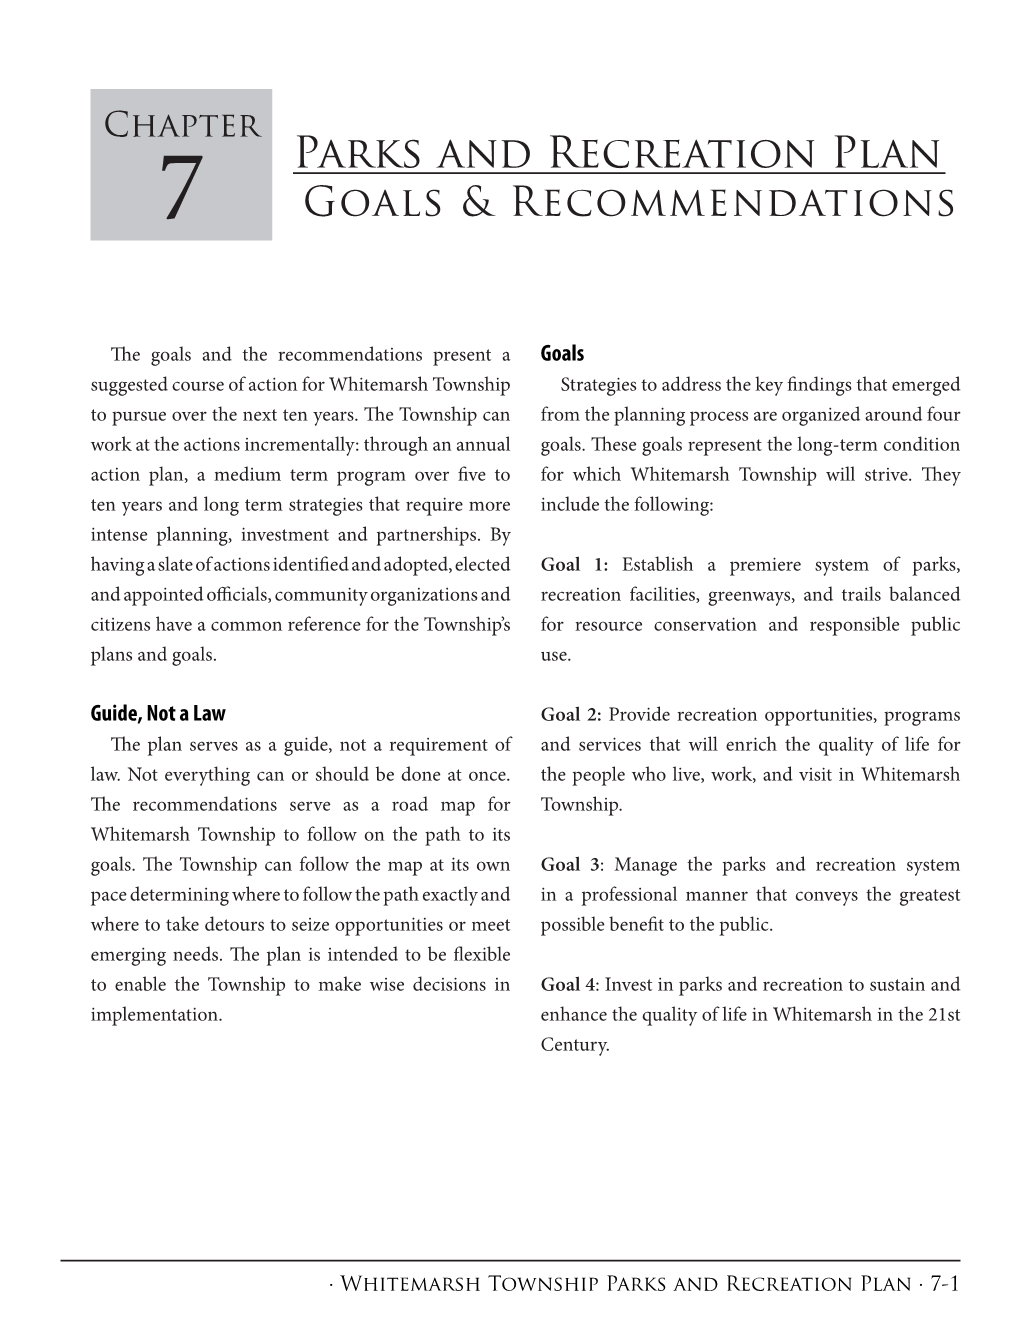 Chapter 7, Goals and Recommendations (PDF)